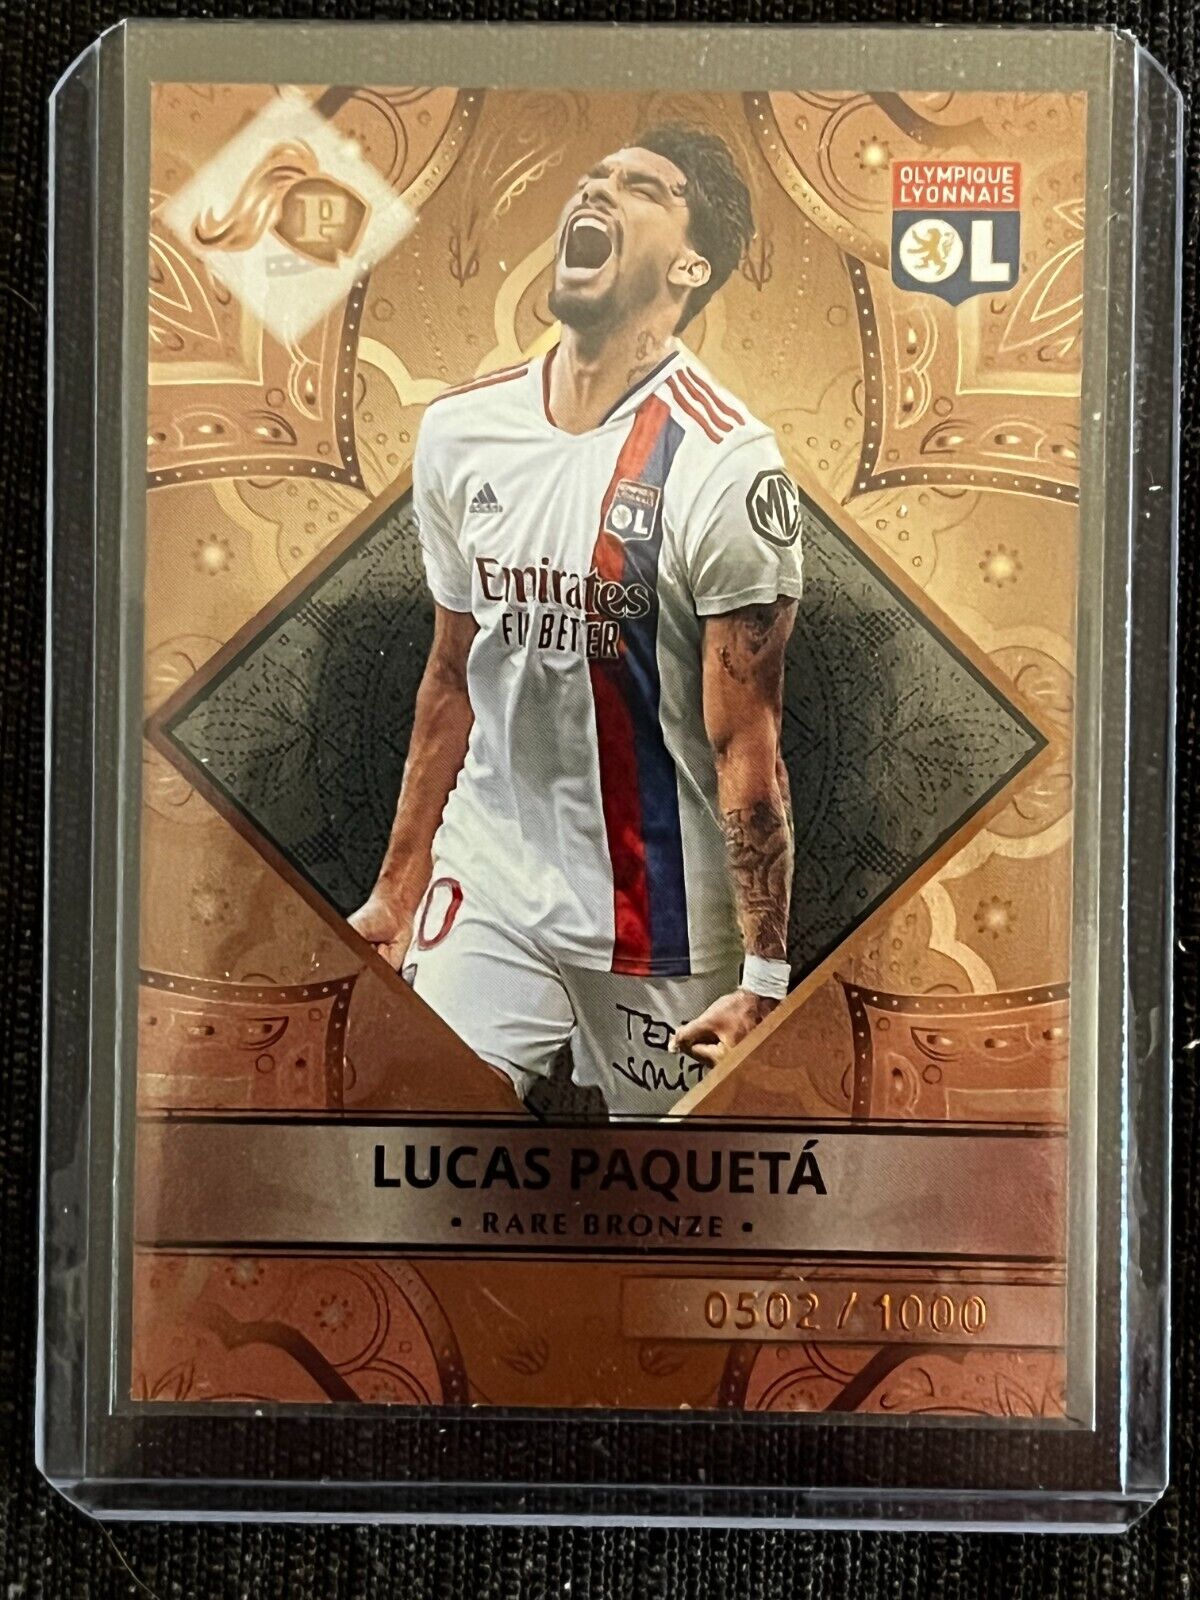 PANINI FC FOOTBALL CARDS ULTRA PREMIUM LUCAS PARALLEL BRONZE PACKAGE 502/1000